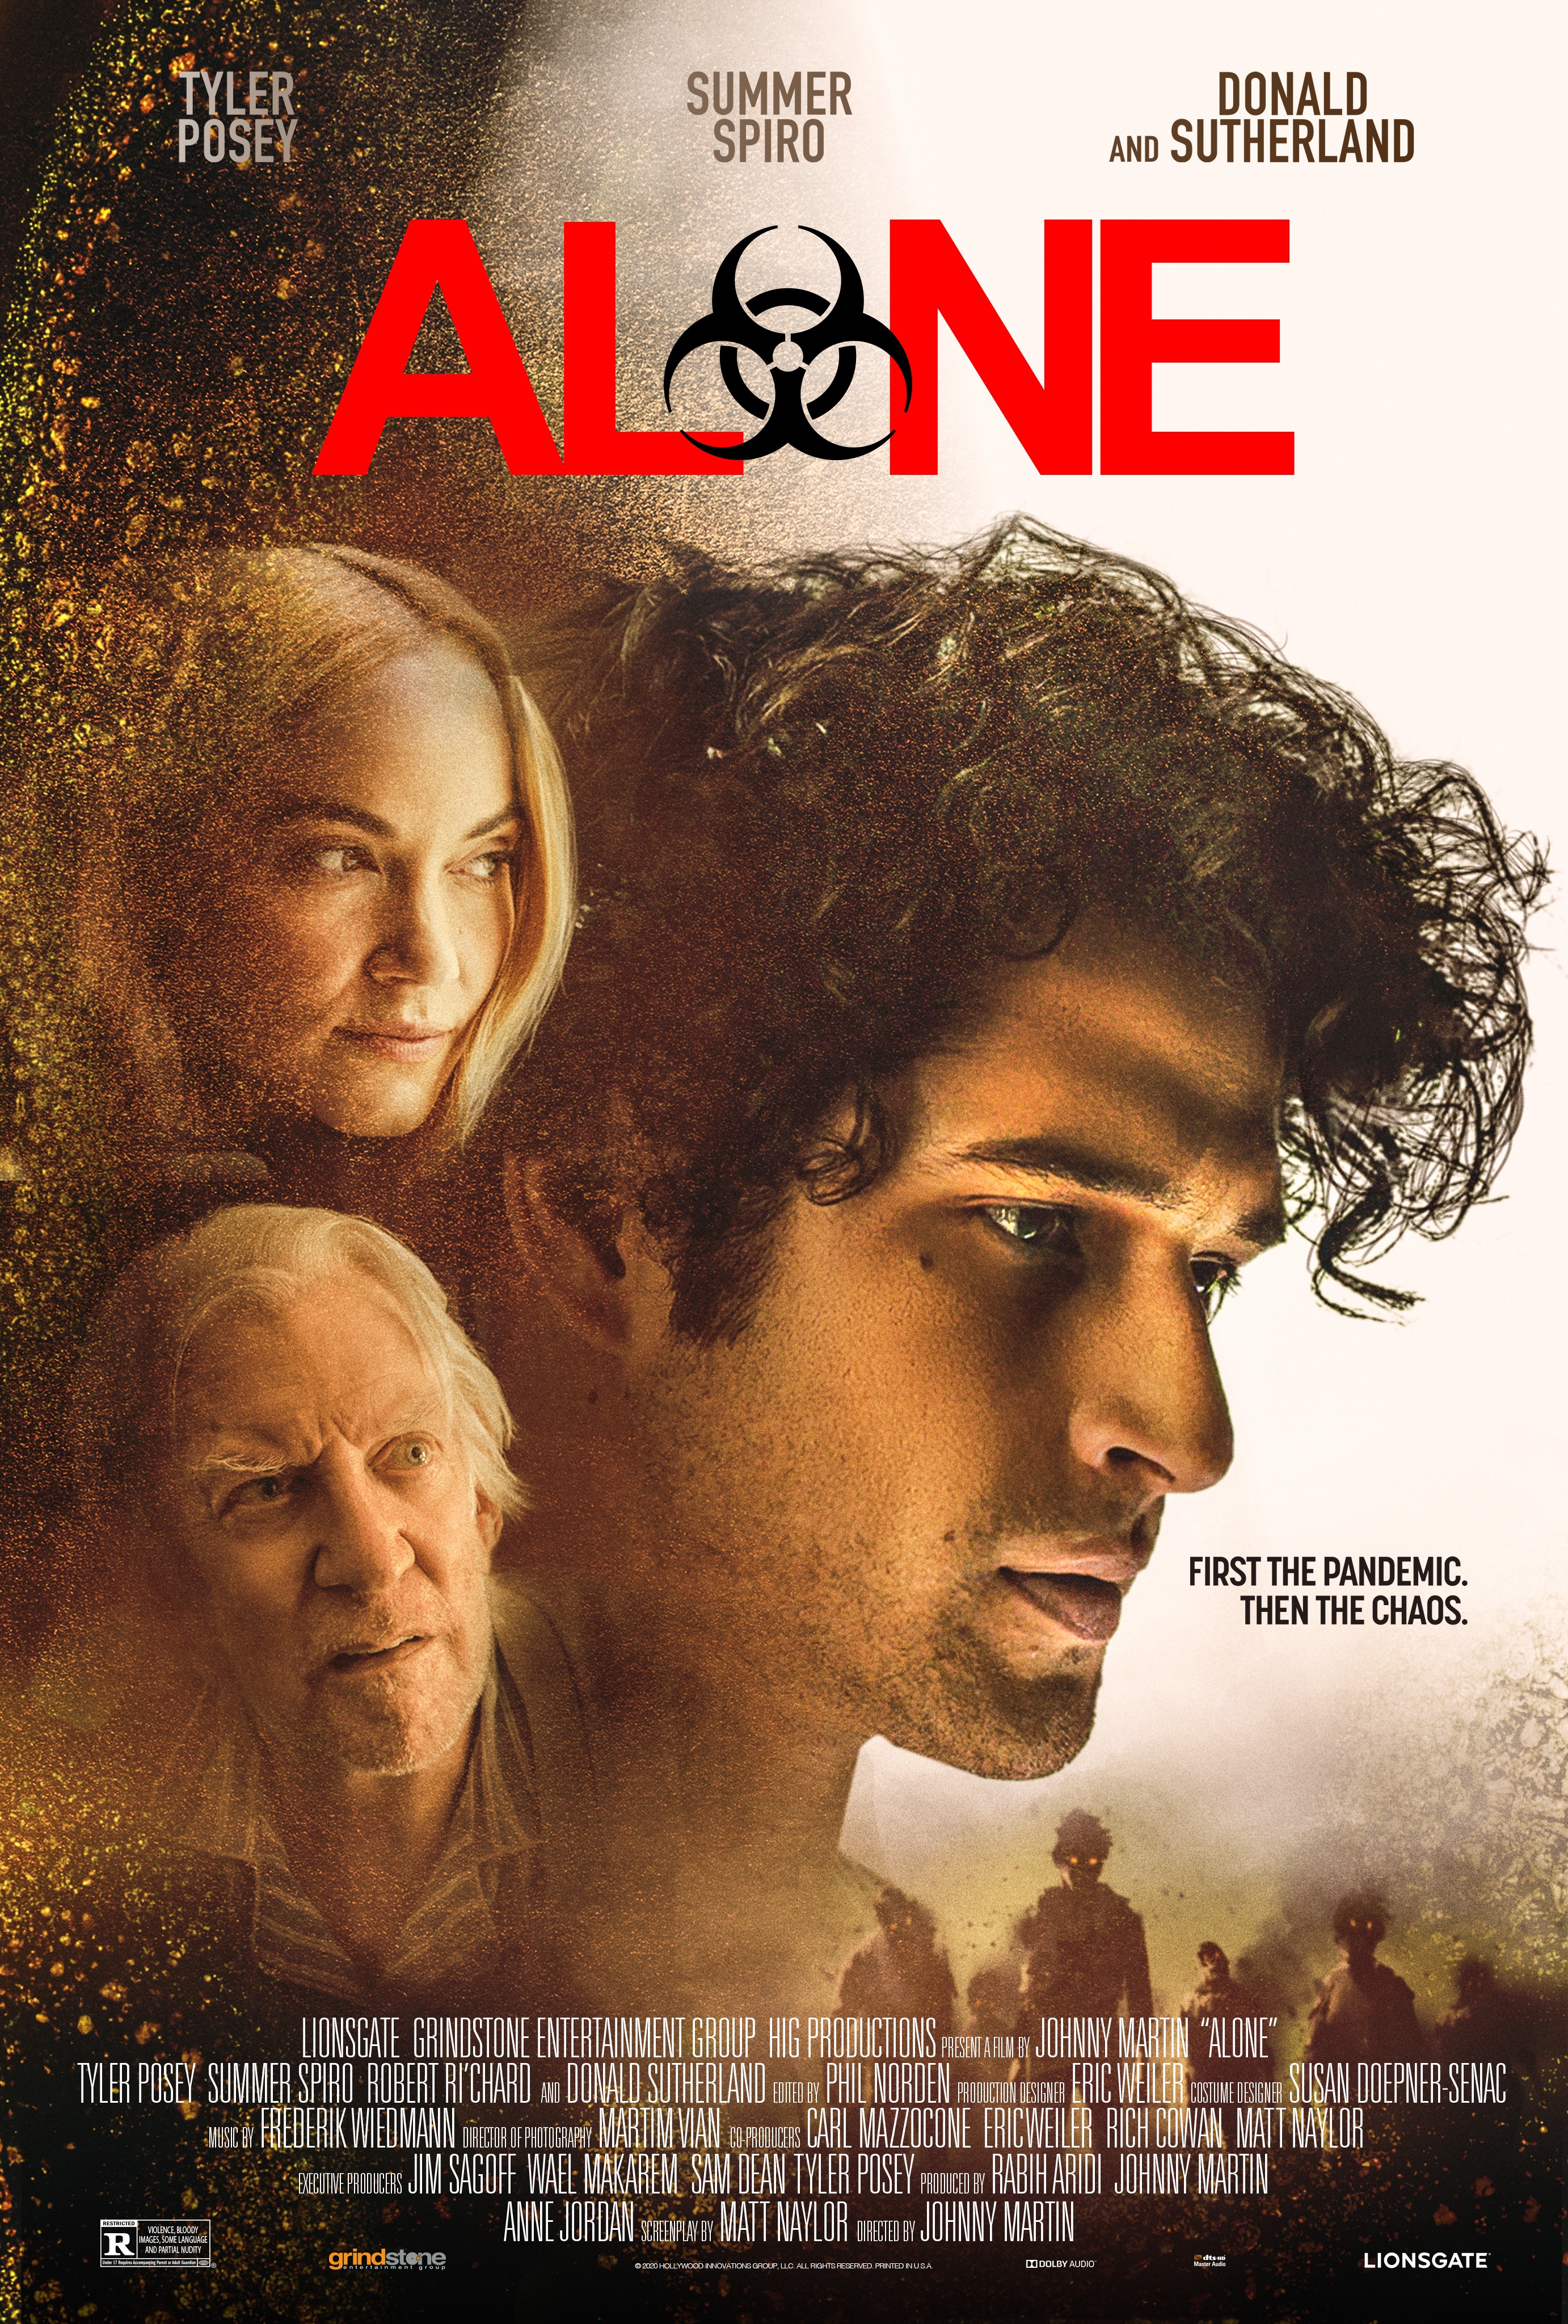 Film Review - Alone